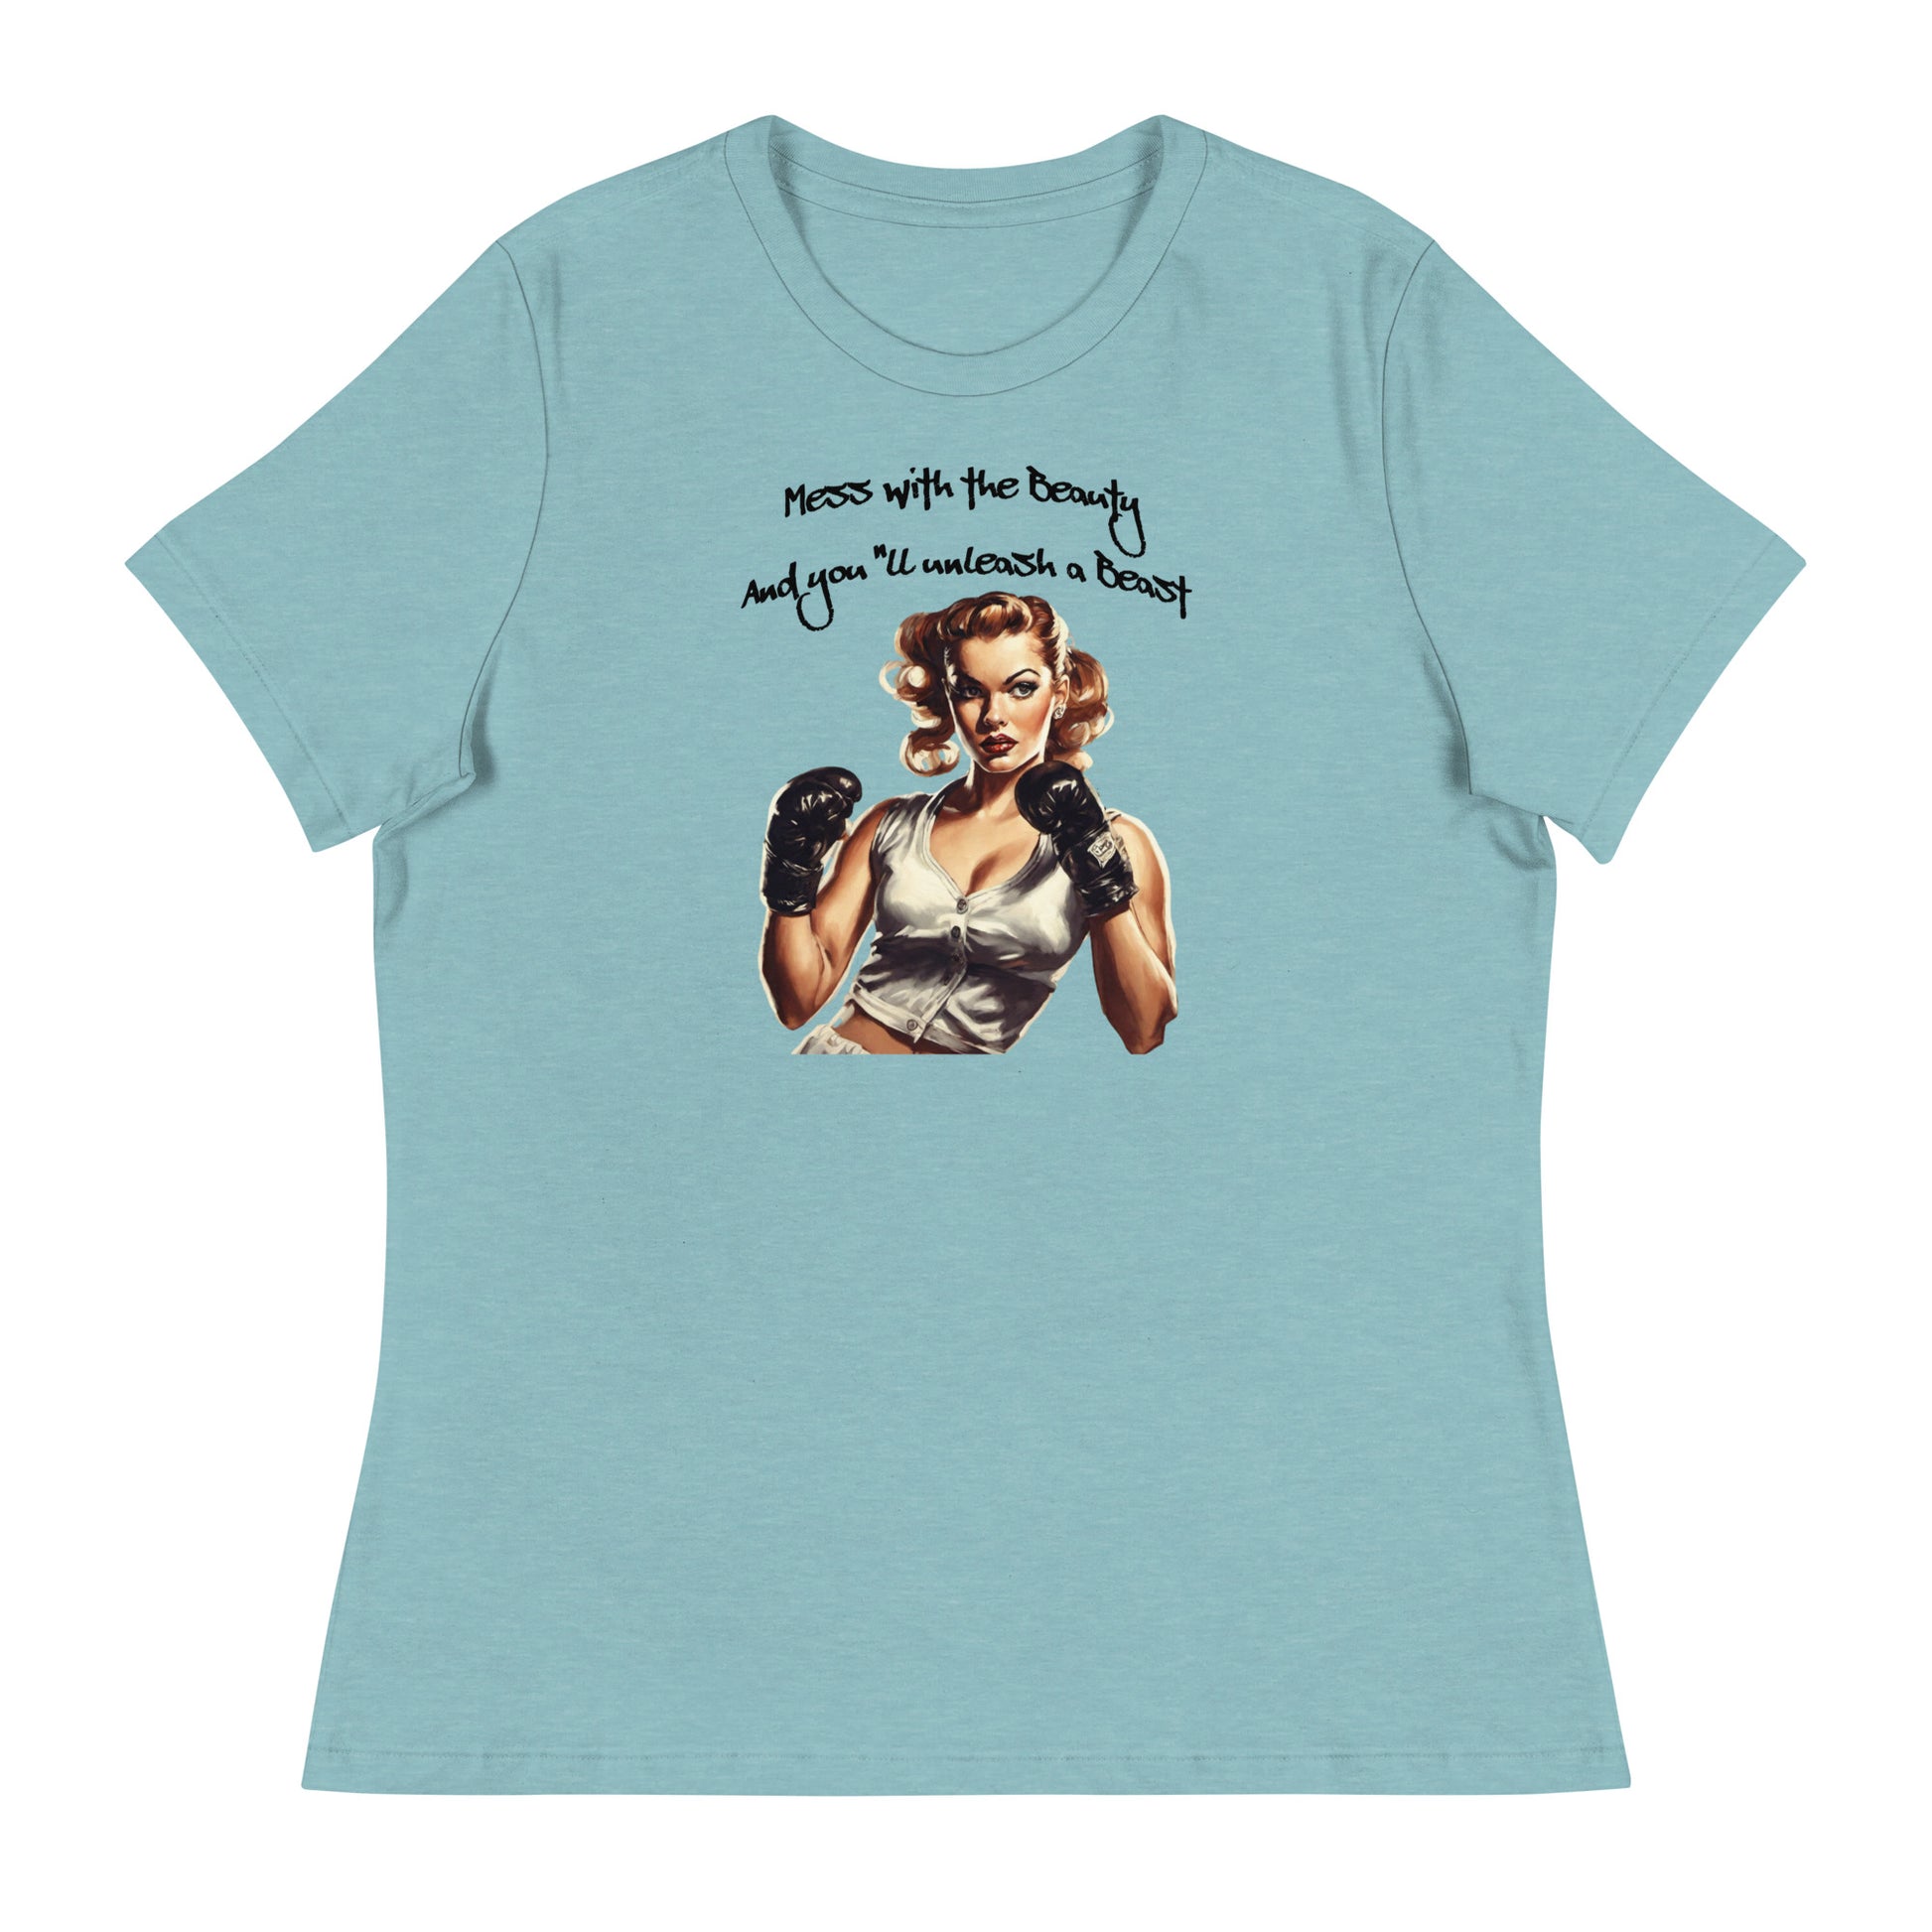 Mess with the Beauty, Unleash the Beast Women's Strength T-Shirt Heather Blue Lagoon